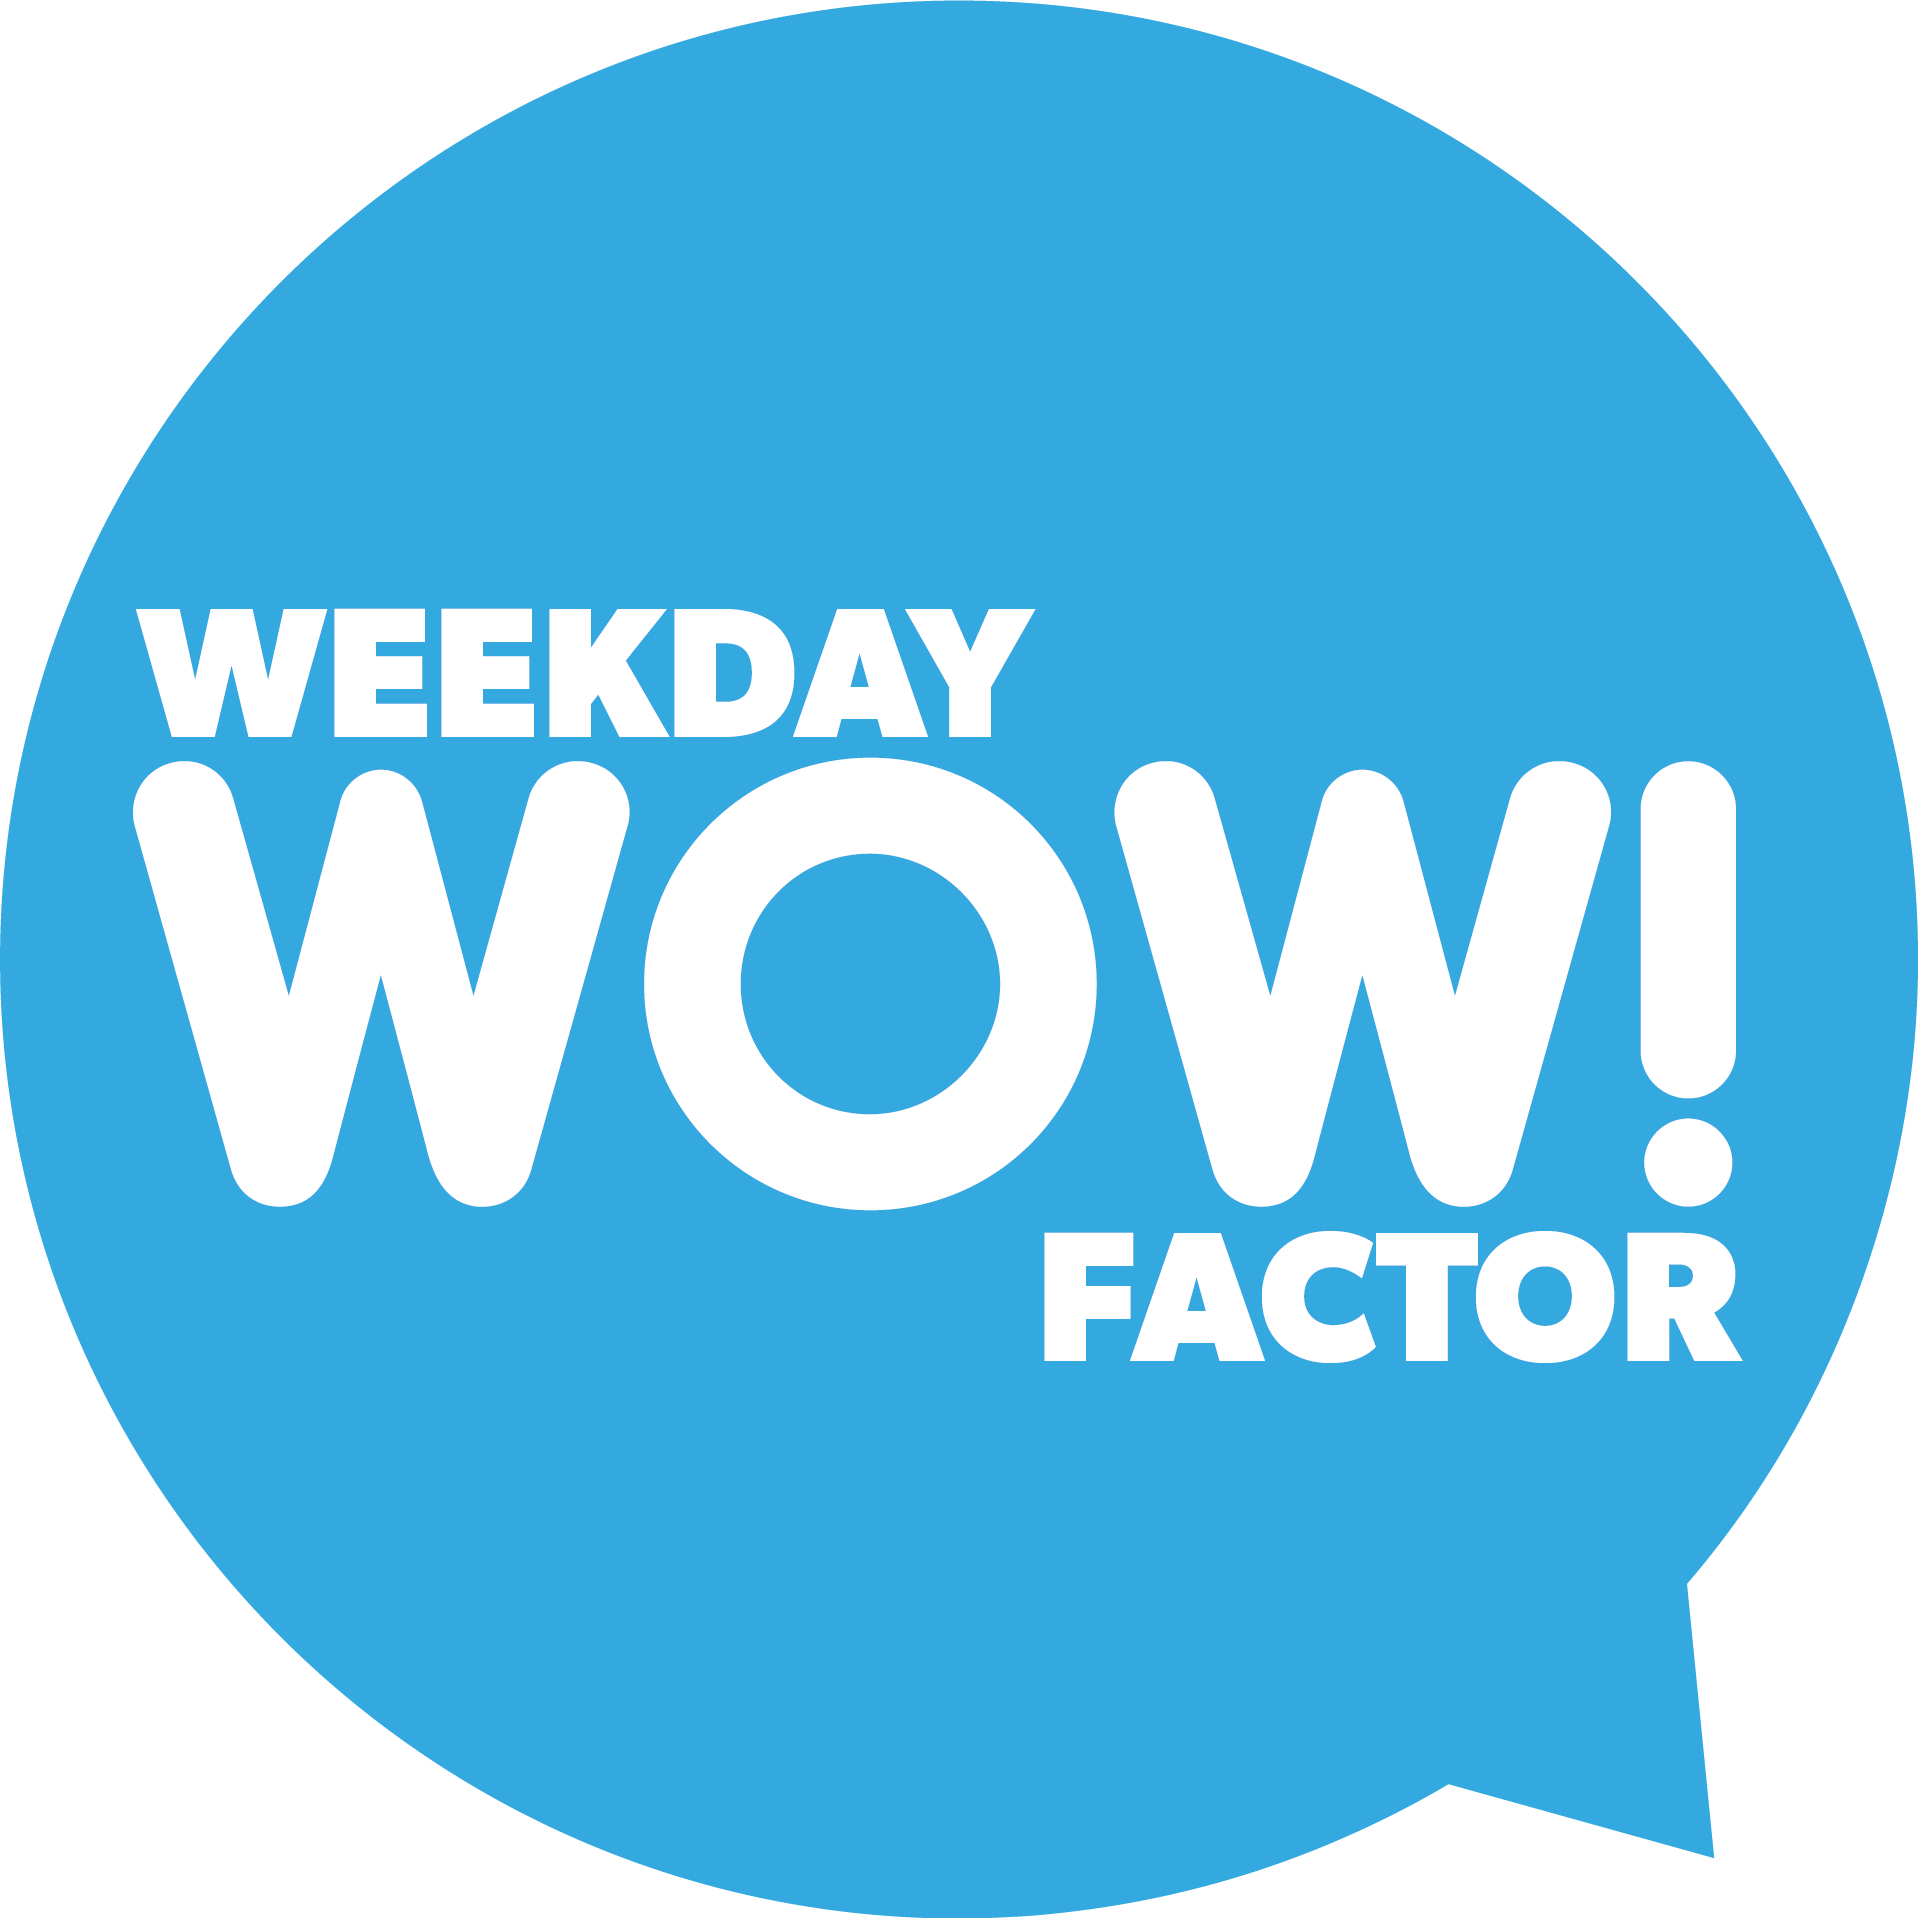 weekday wow factor